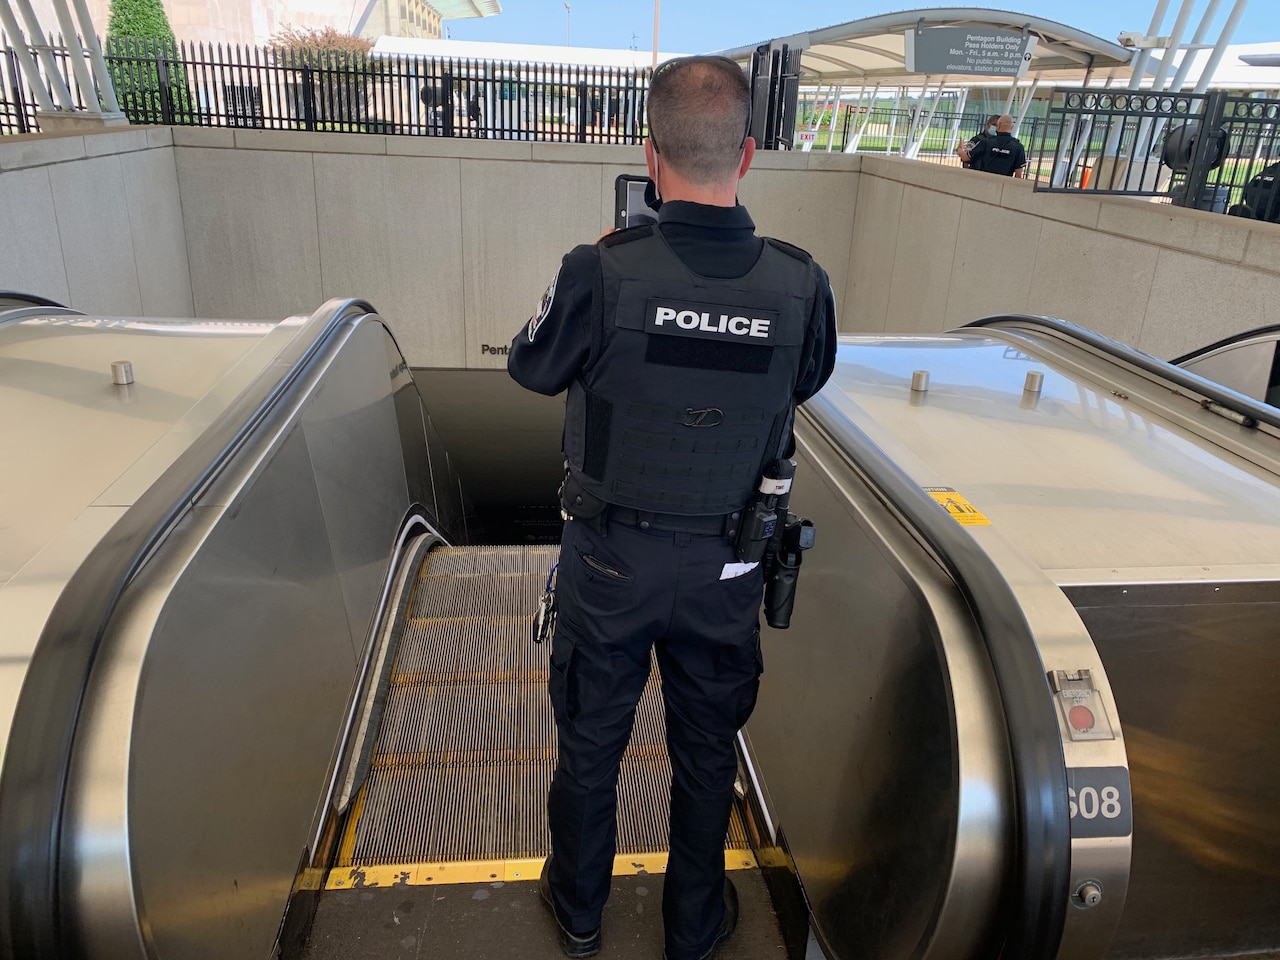 A Pentagon police, shown from behind, stands and holds up a tablet at the top of an escalator.